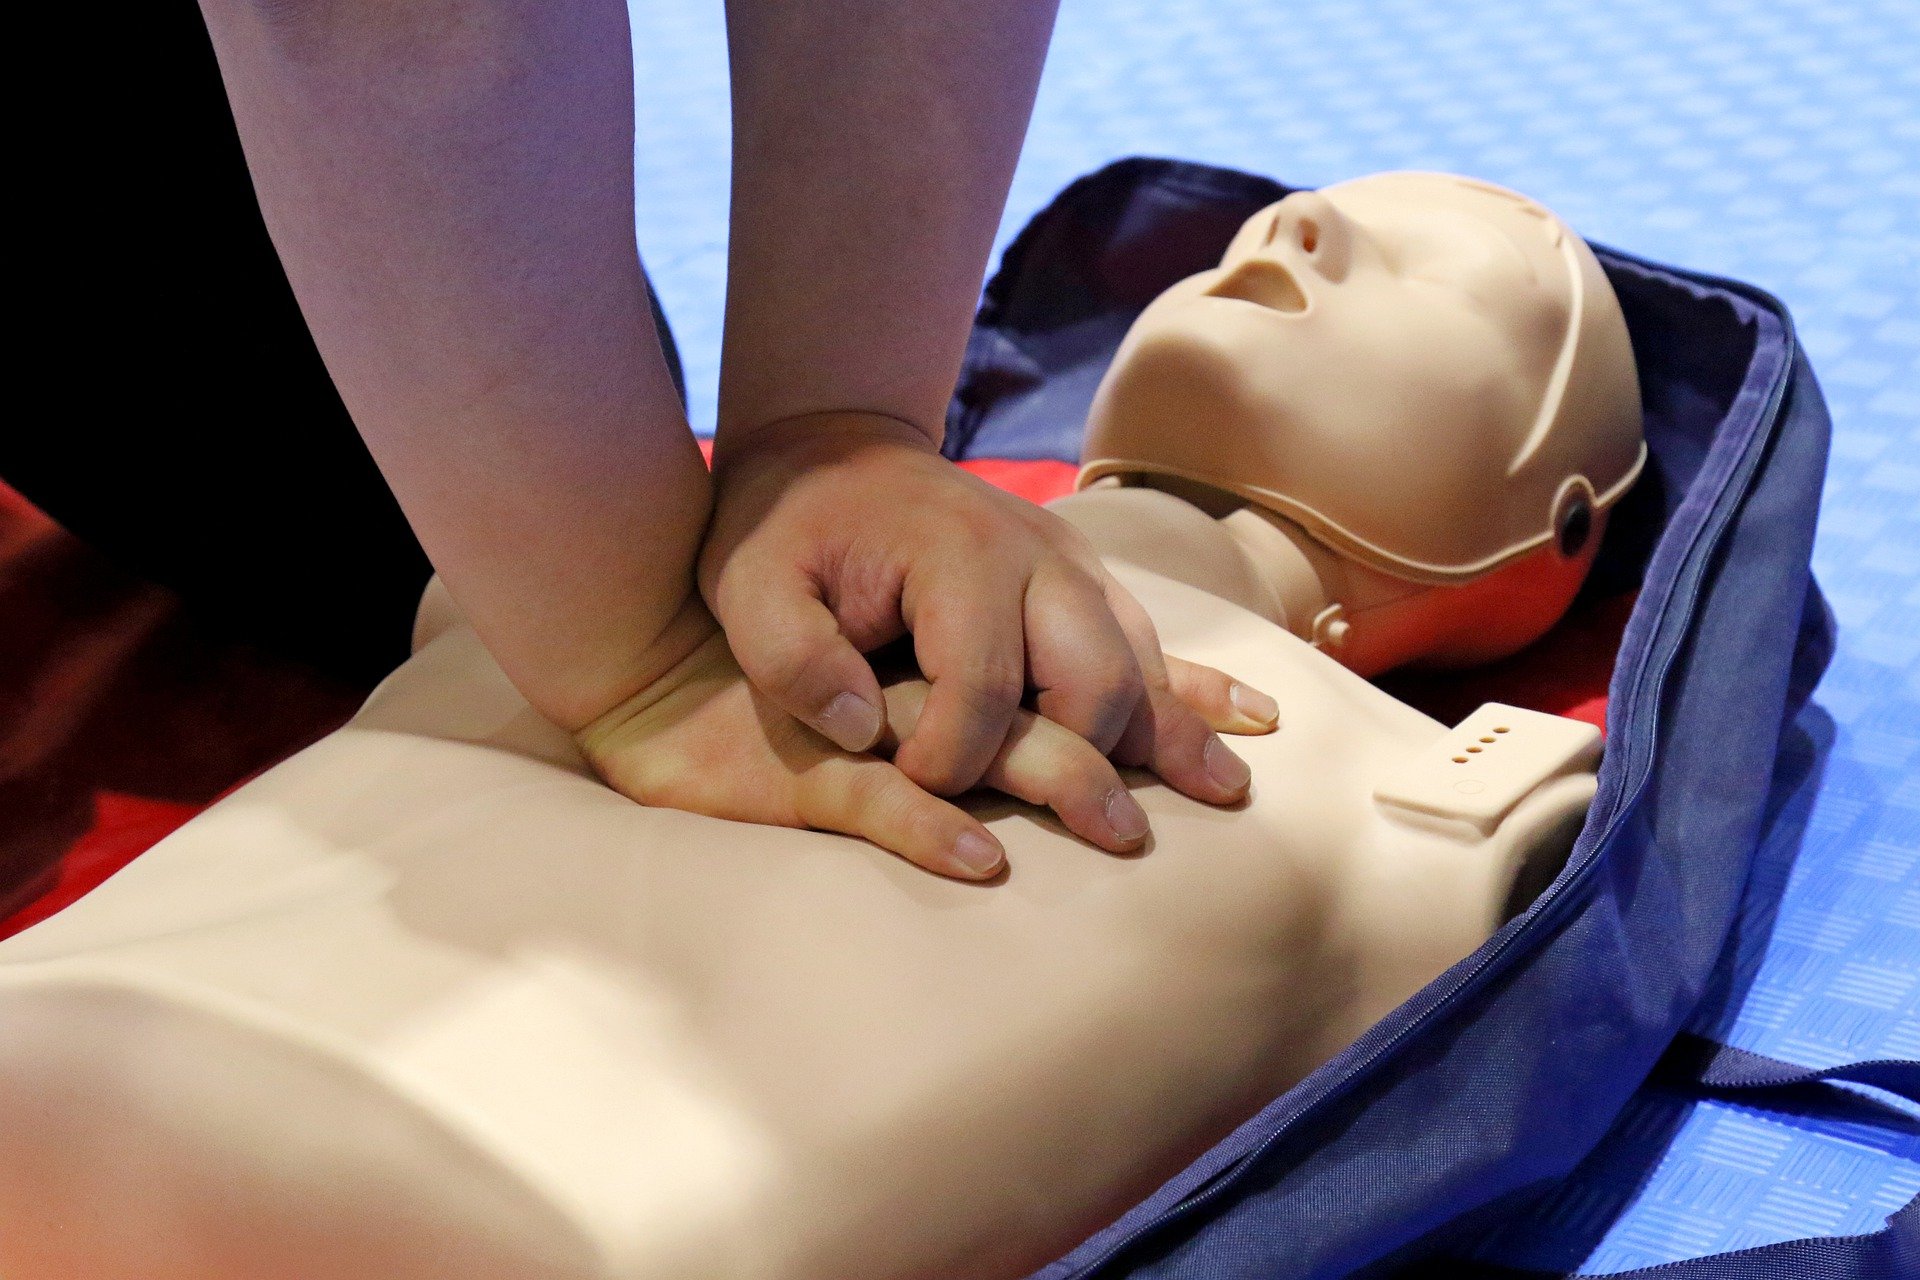 A demo of CPR, Paramedical Institutes in India